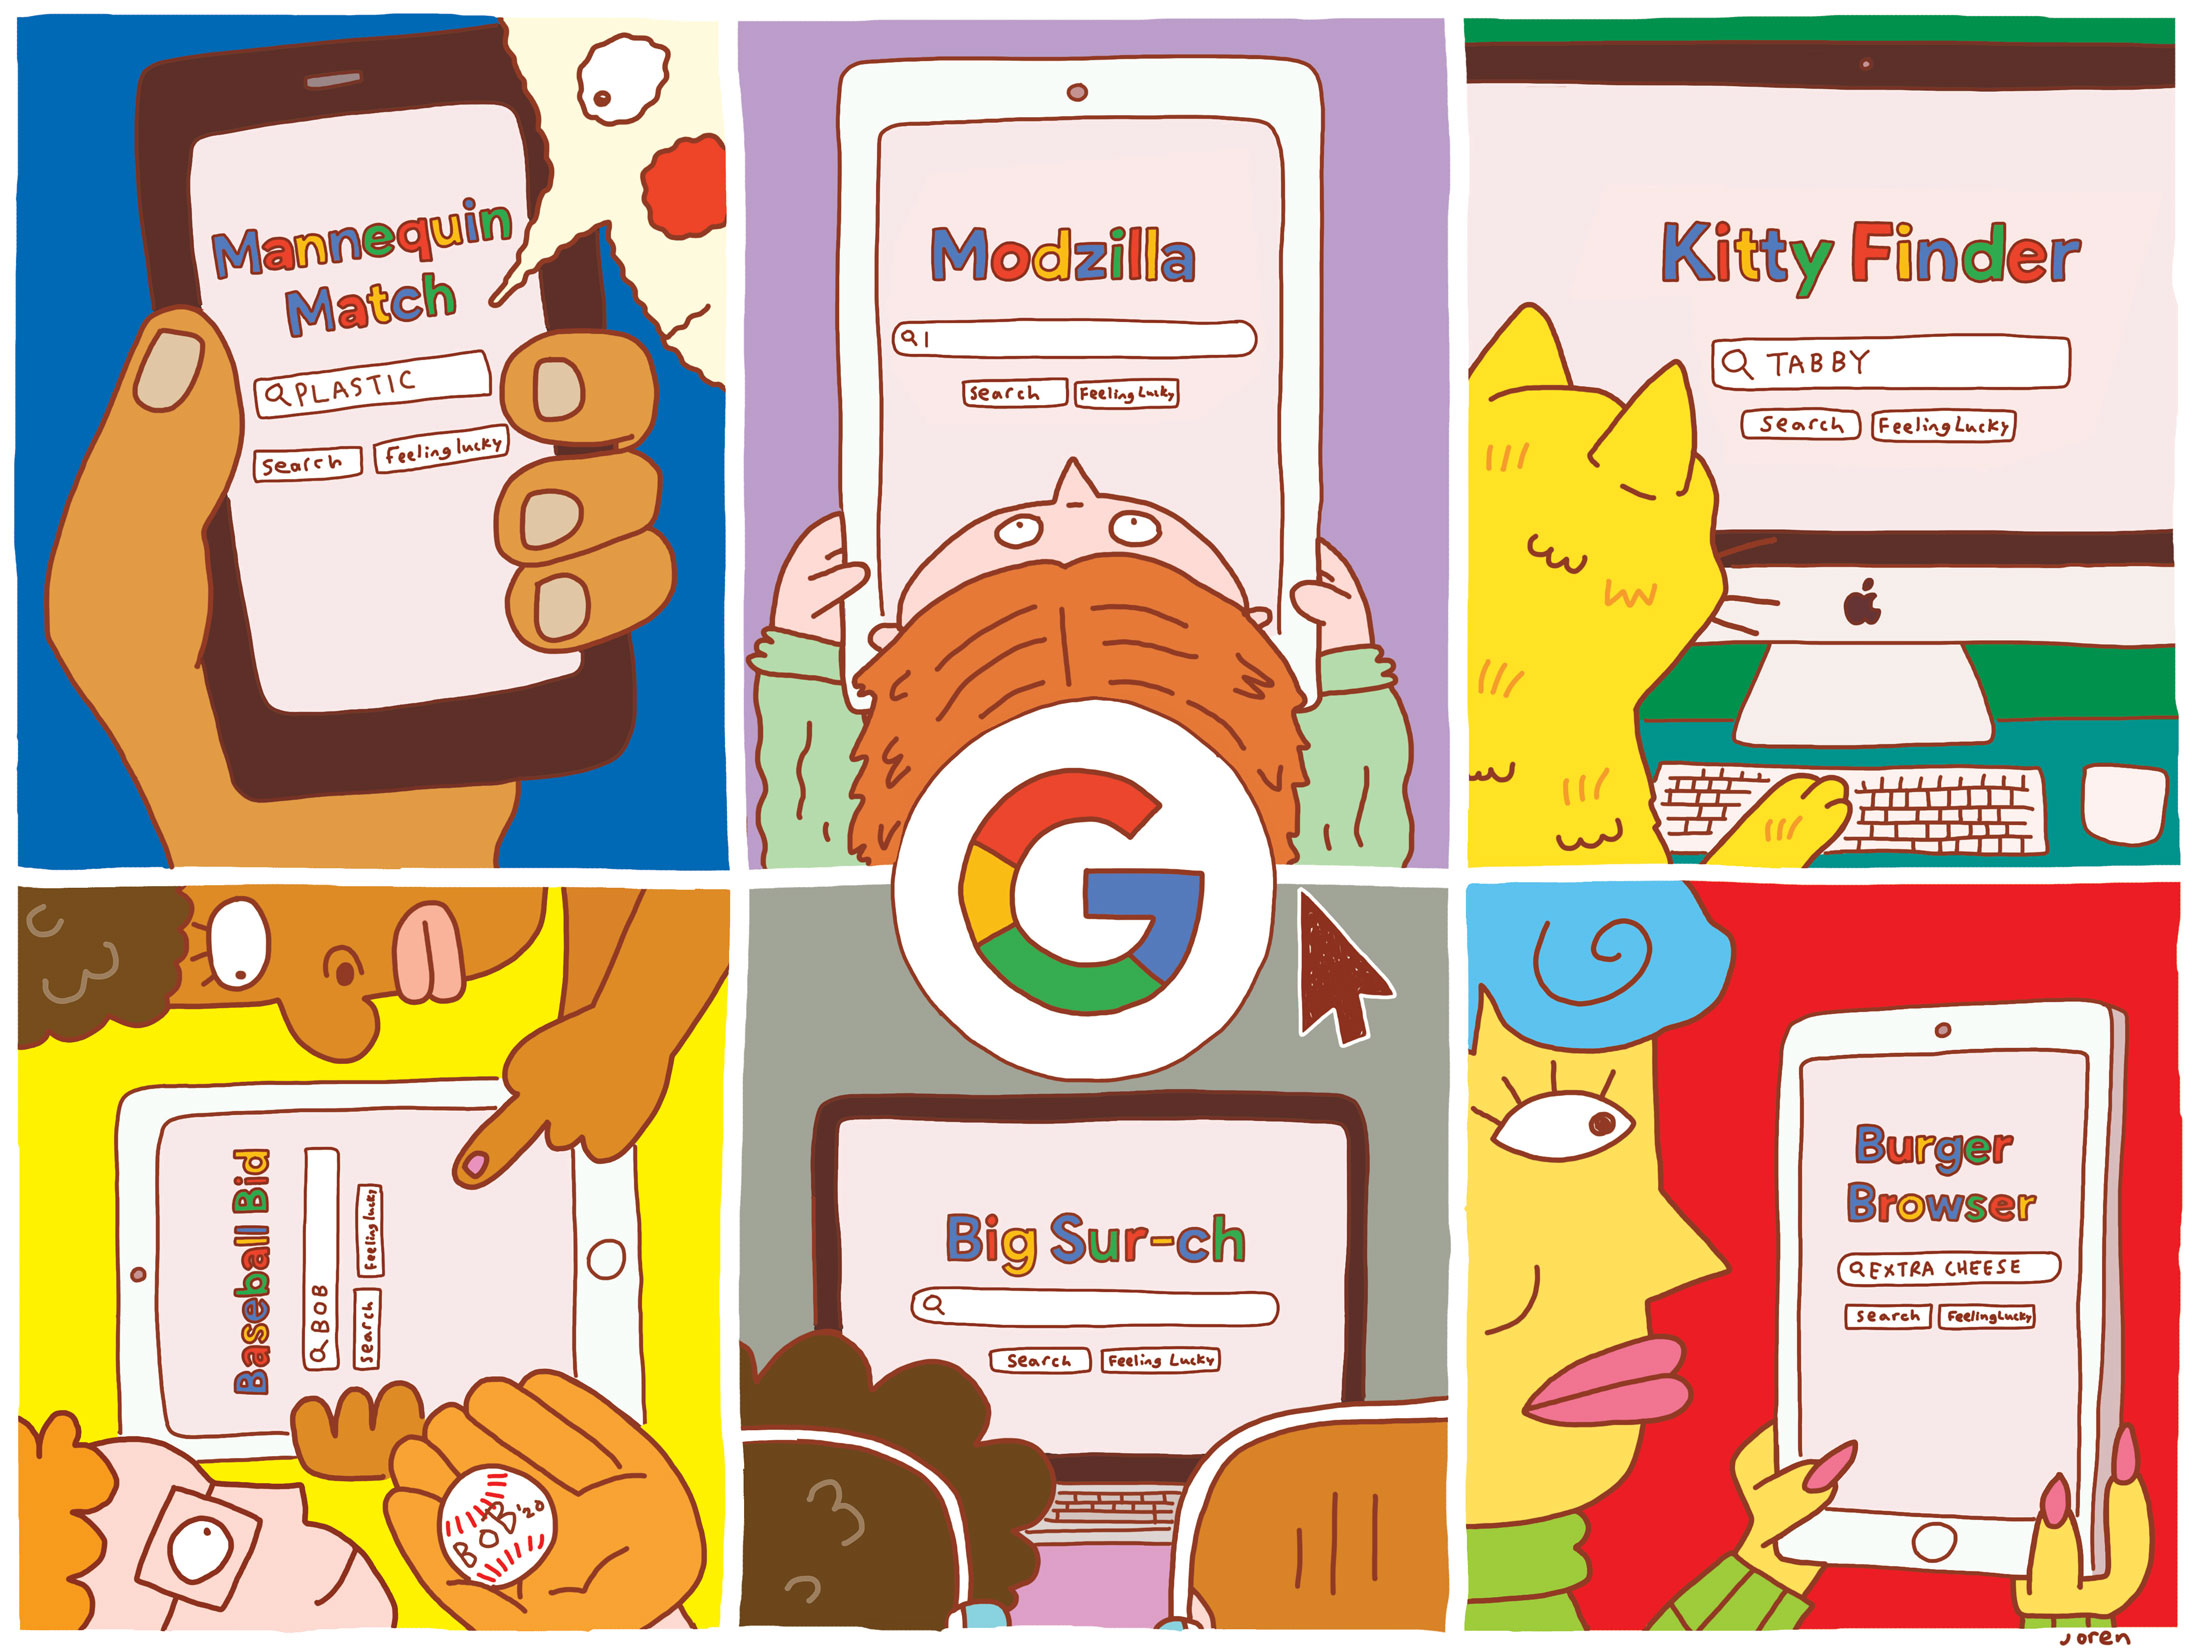 to break google’s monopoly on search, make its index public